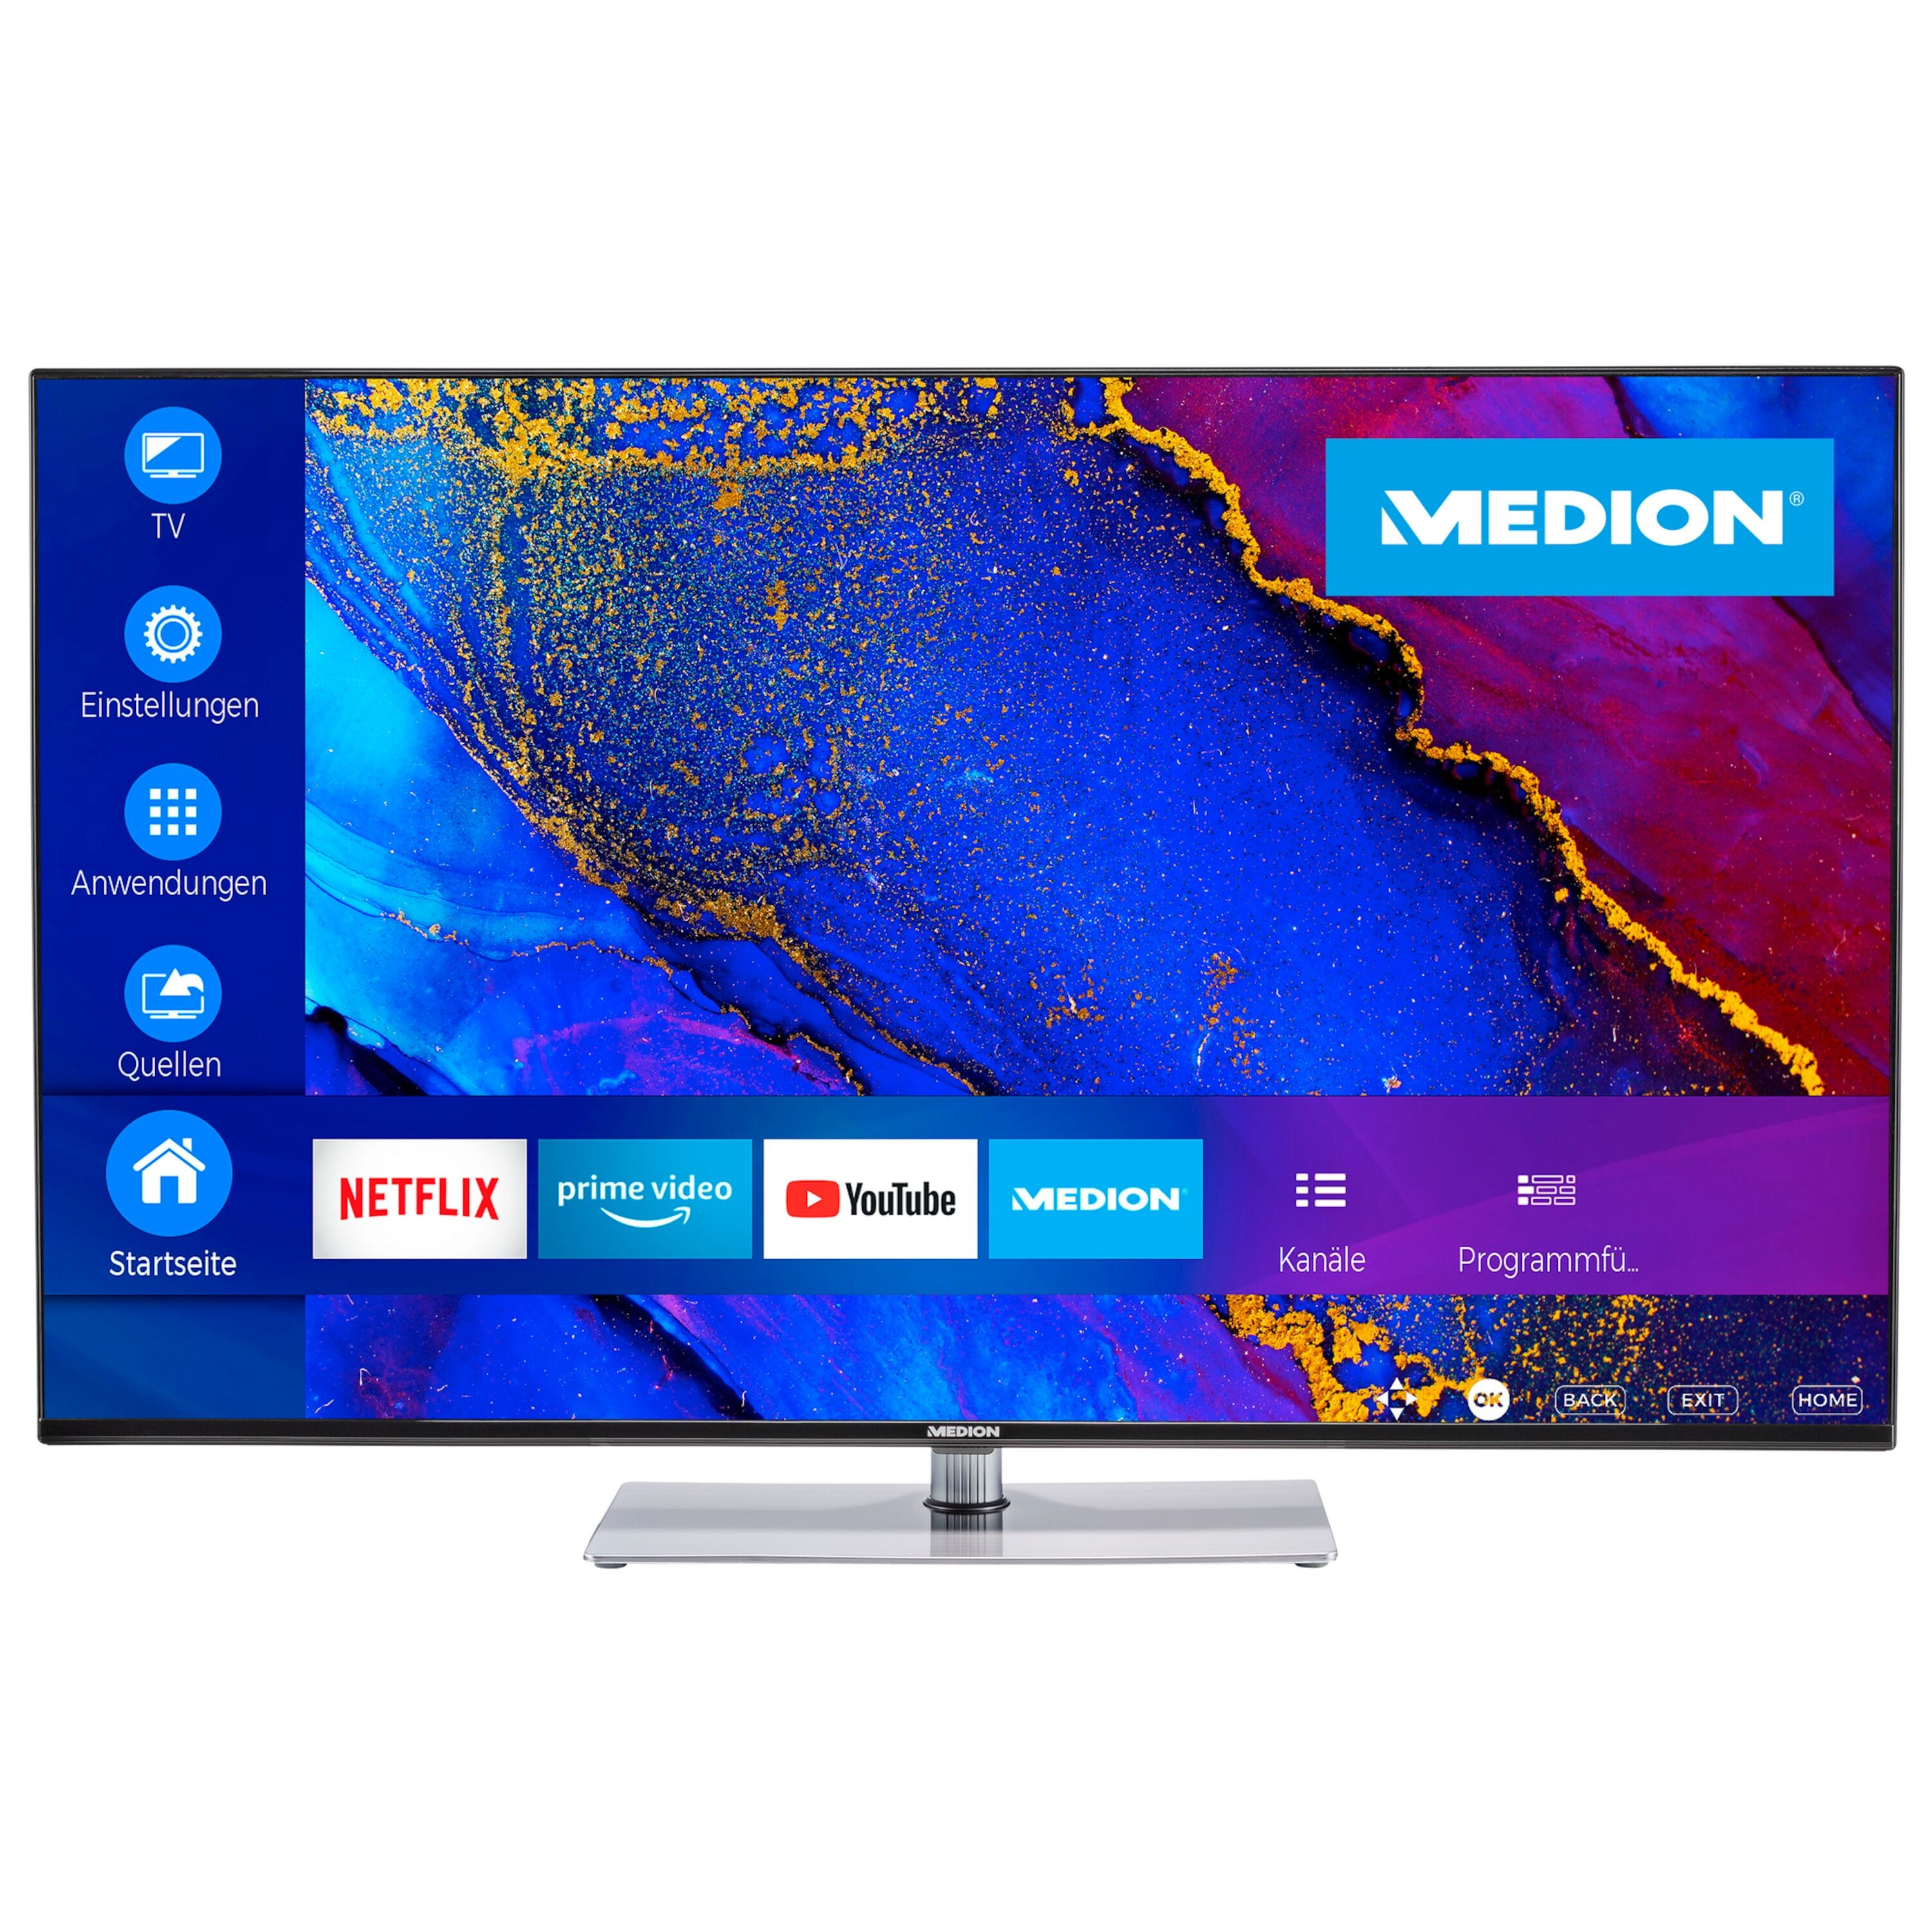 MEDION MEDION® LIFE X15005 Smart-TV 125,7 cm (50 pouces) Ultra HD Display HDR Dolby Vision Micro Dimming MEMC PVR ready Netflix Amazon